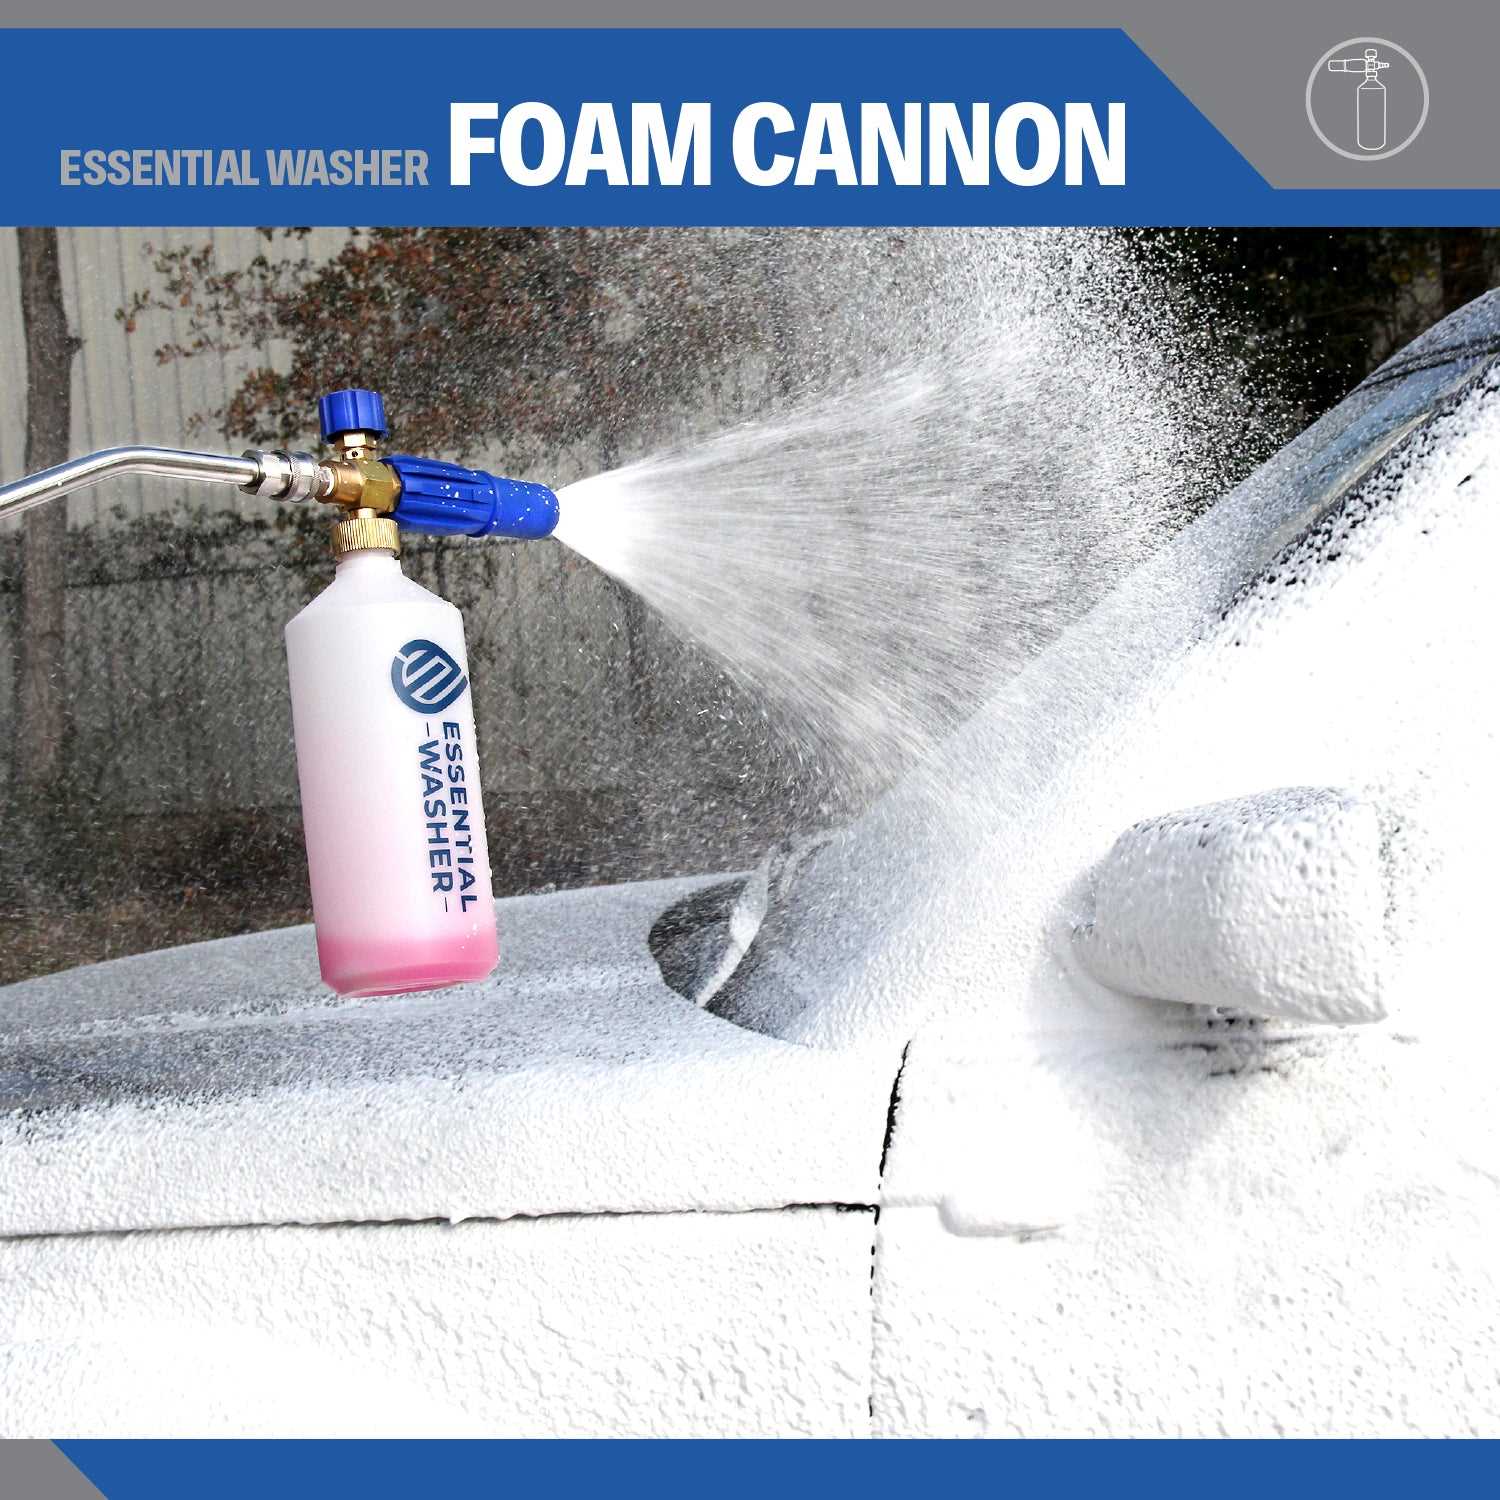 Heavy Duty Foam Cannon | High Pressure Washer Accessory With Stainless Steel QC Plug & Adjustable Features